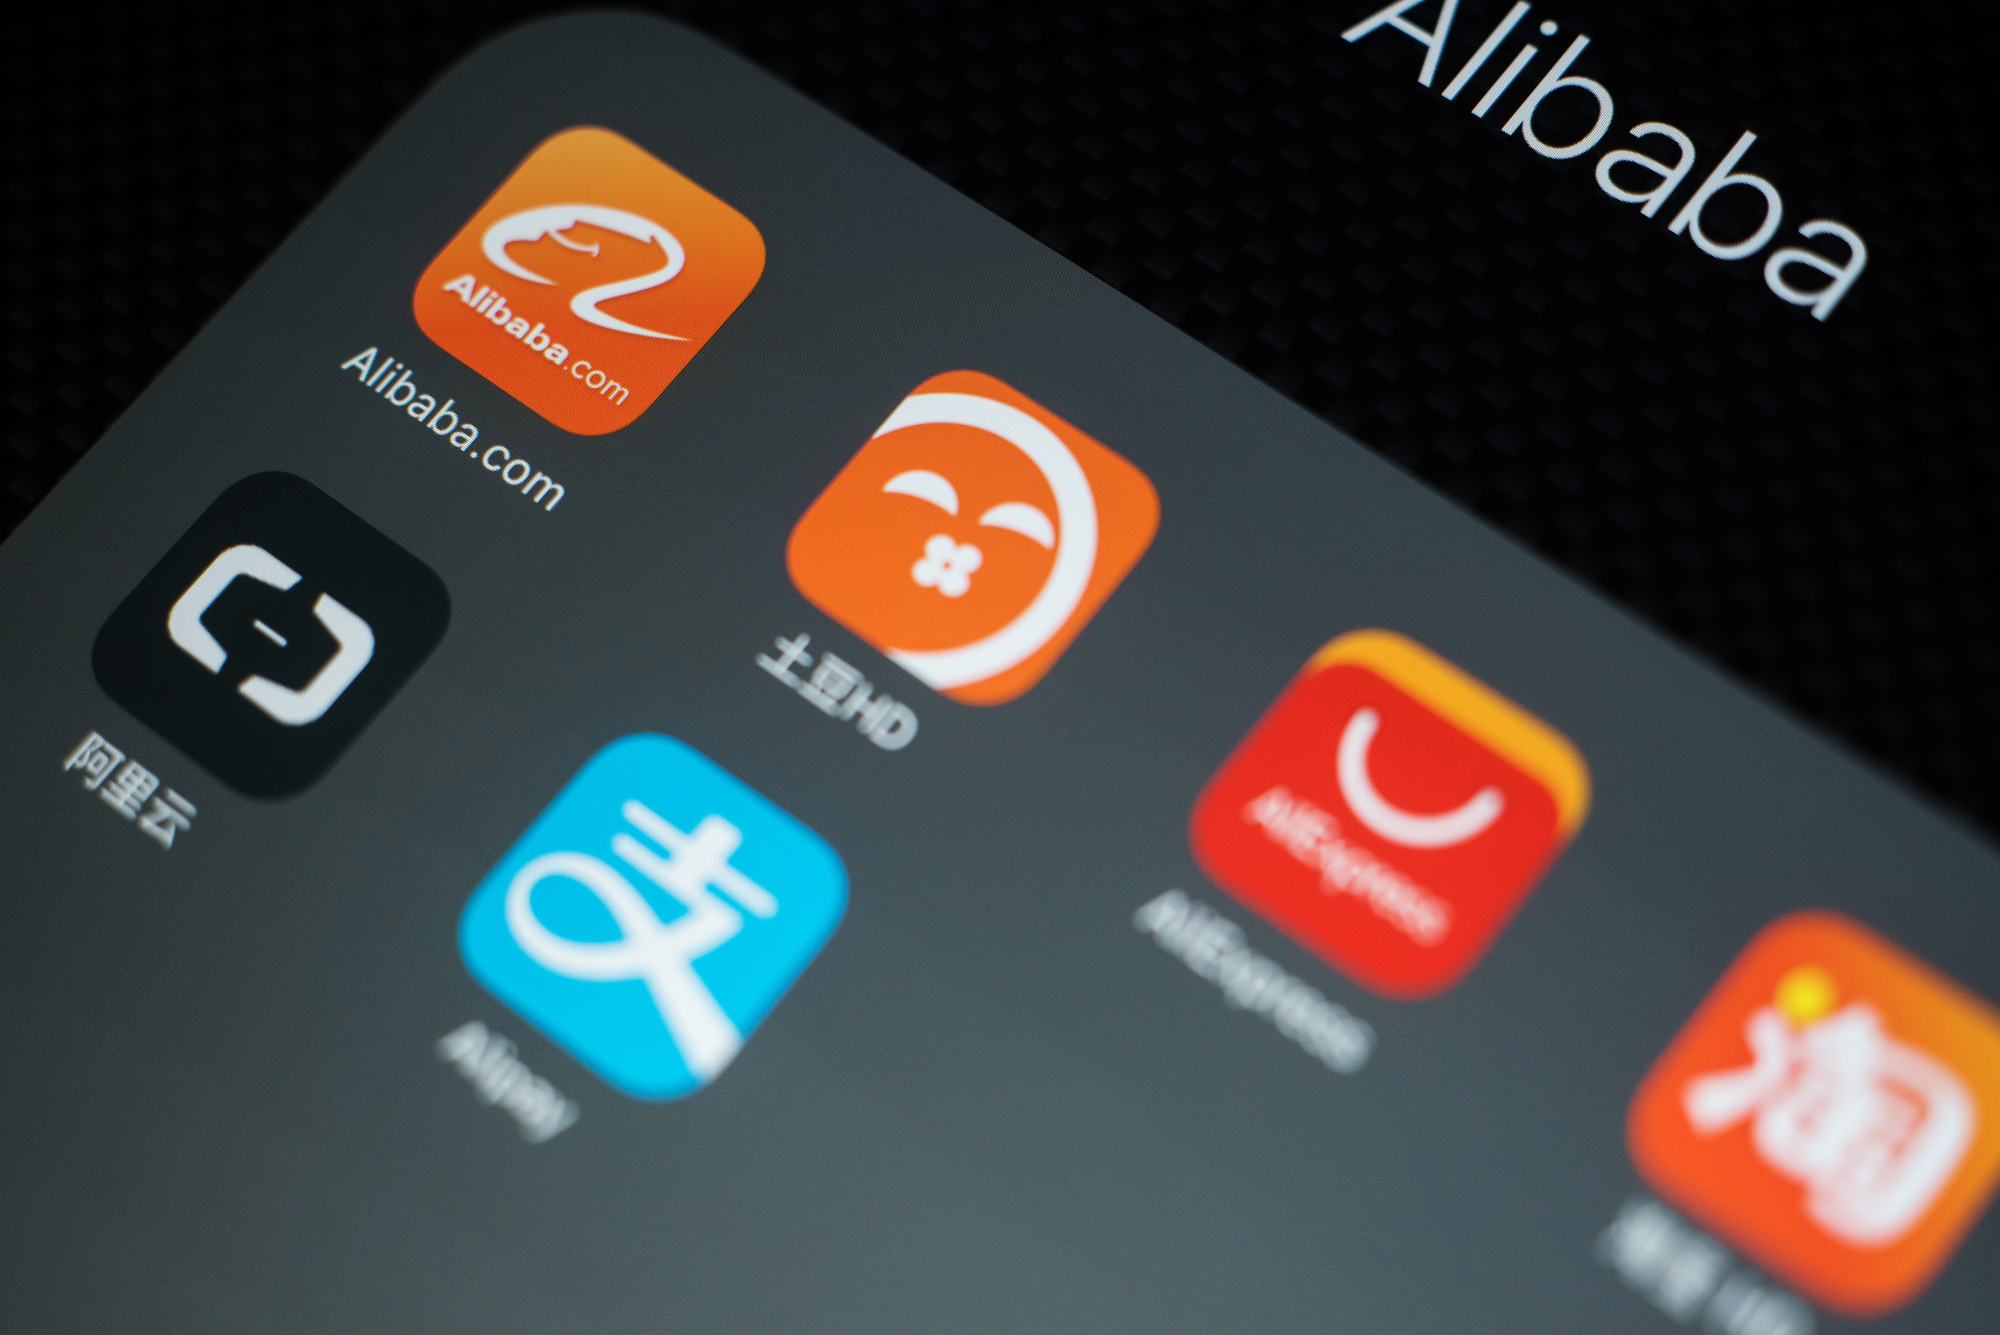 General Images of Alibaba Group Holding Ltd. Applications Ahead of Earnings Report